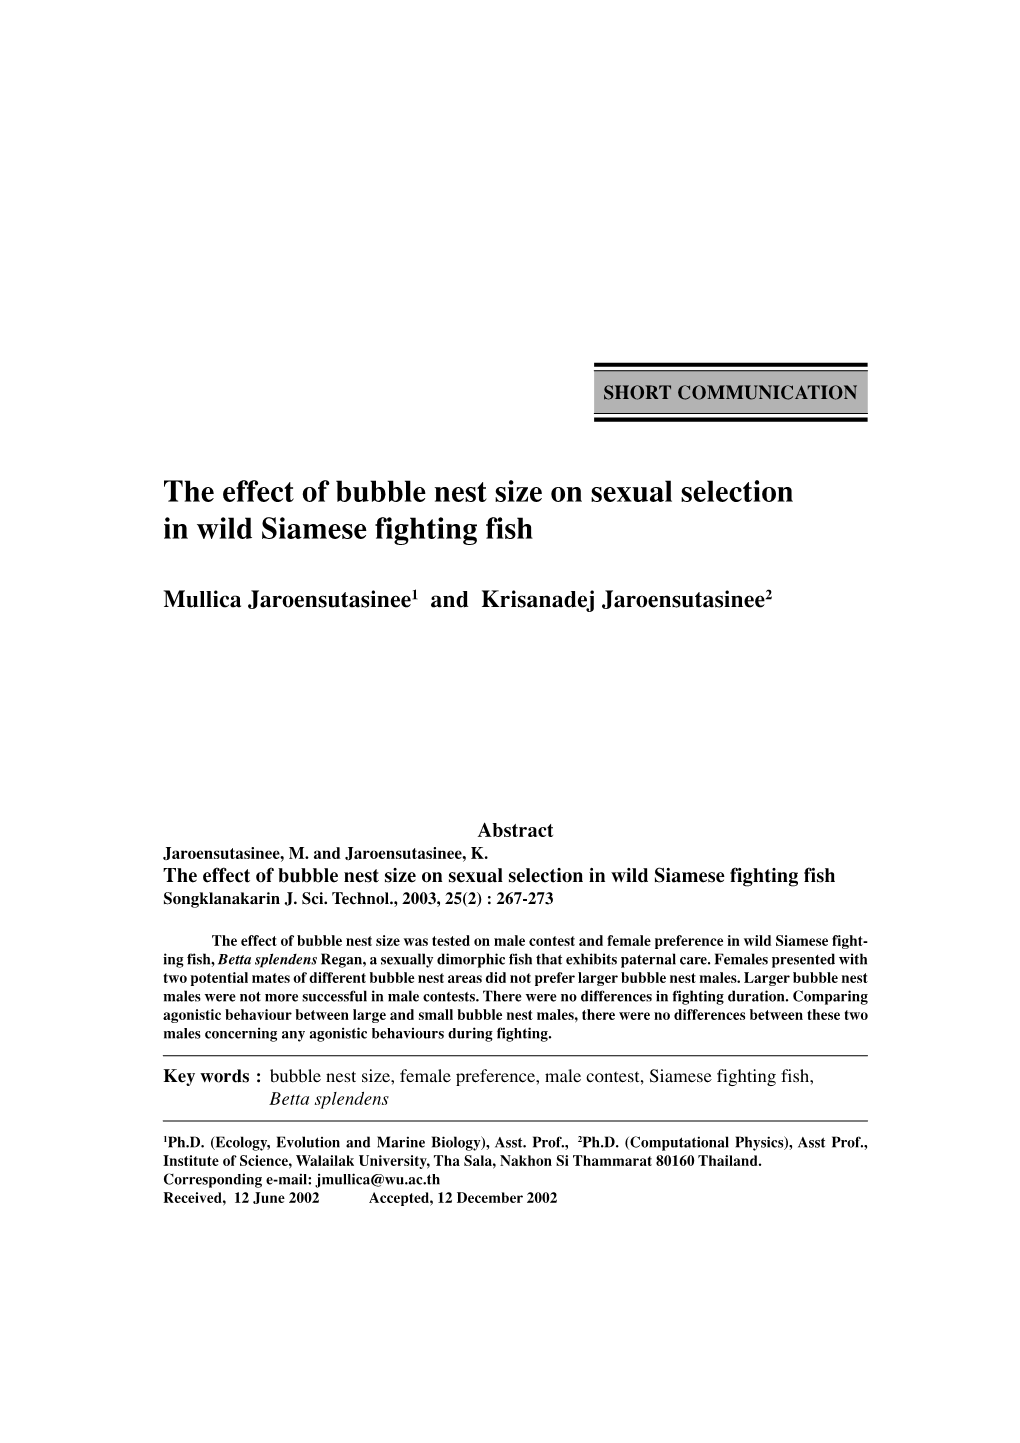 The Effect of Bubble Nest Size on Sexual Selection in Wild Siamese Fighting Fish